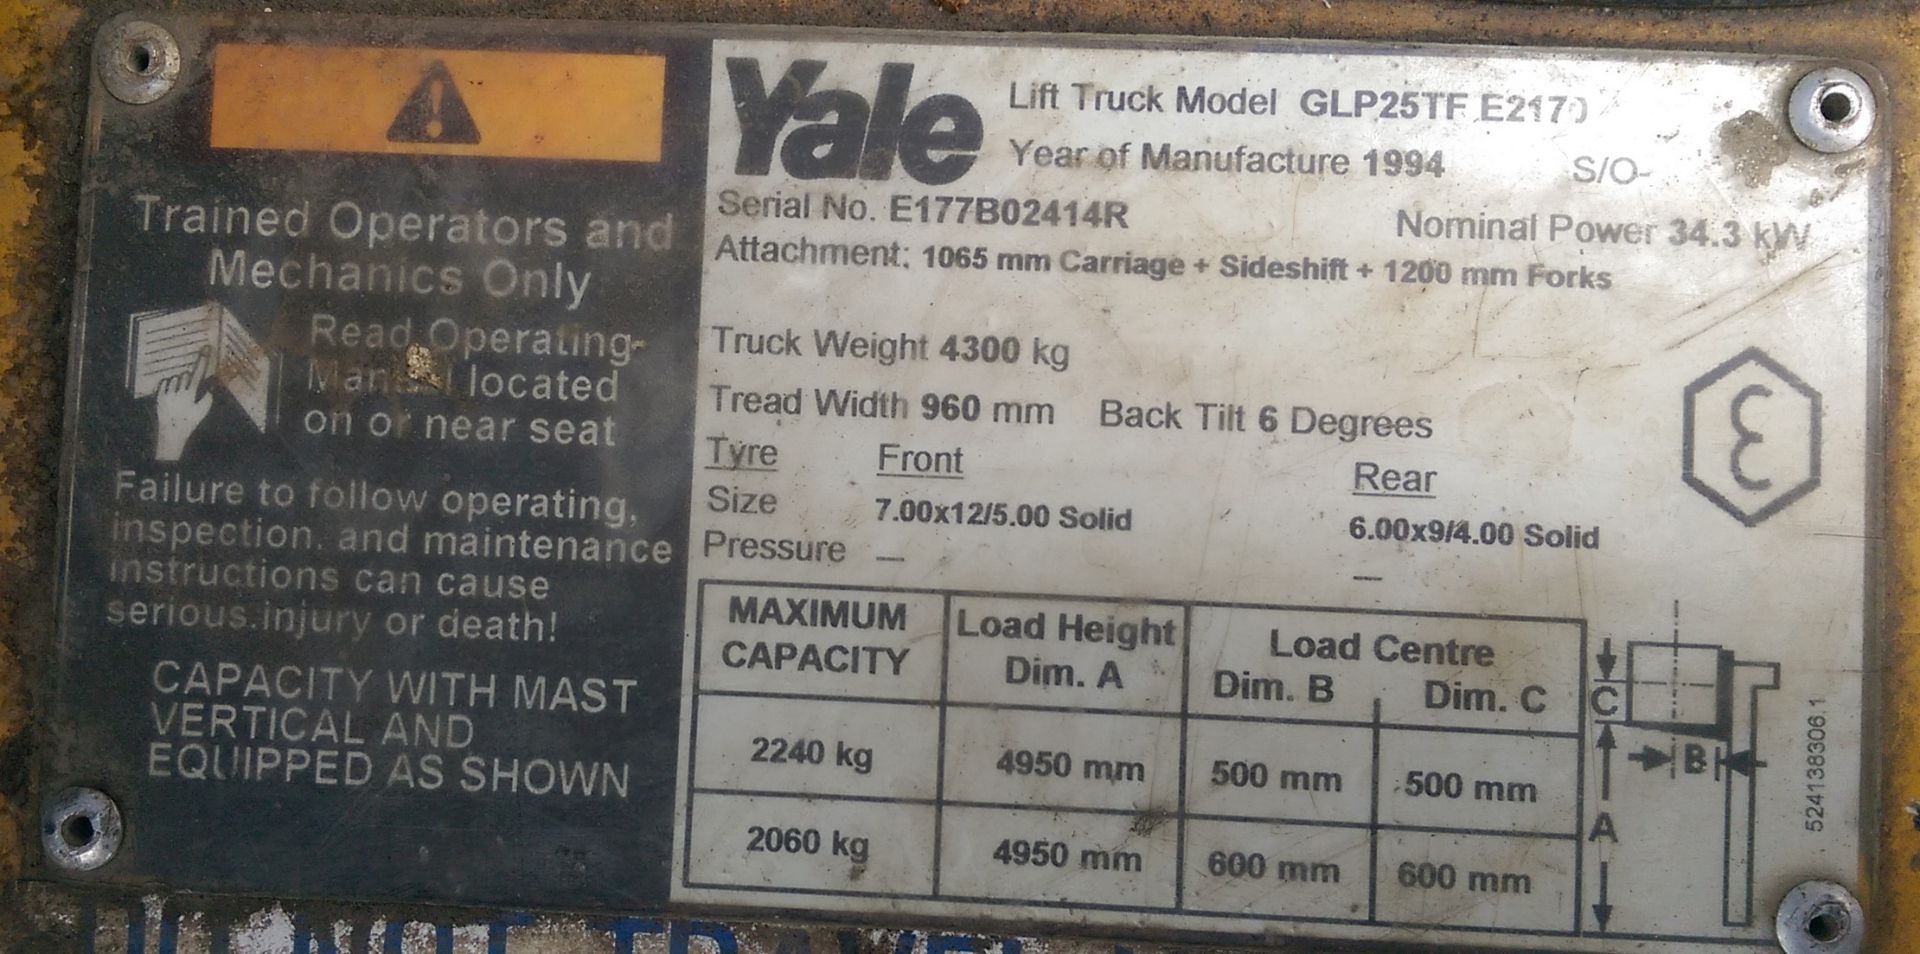 Yale GLP25TF E2170 Forklift - Image 6 of 6